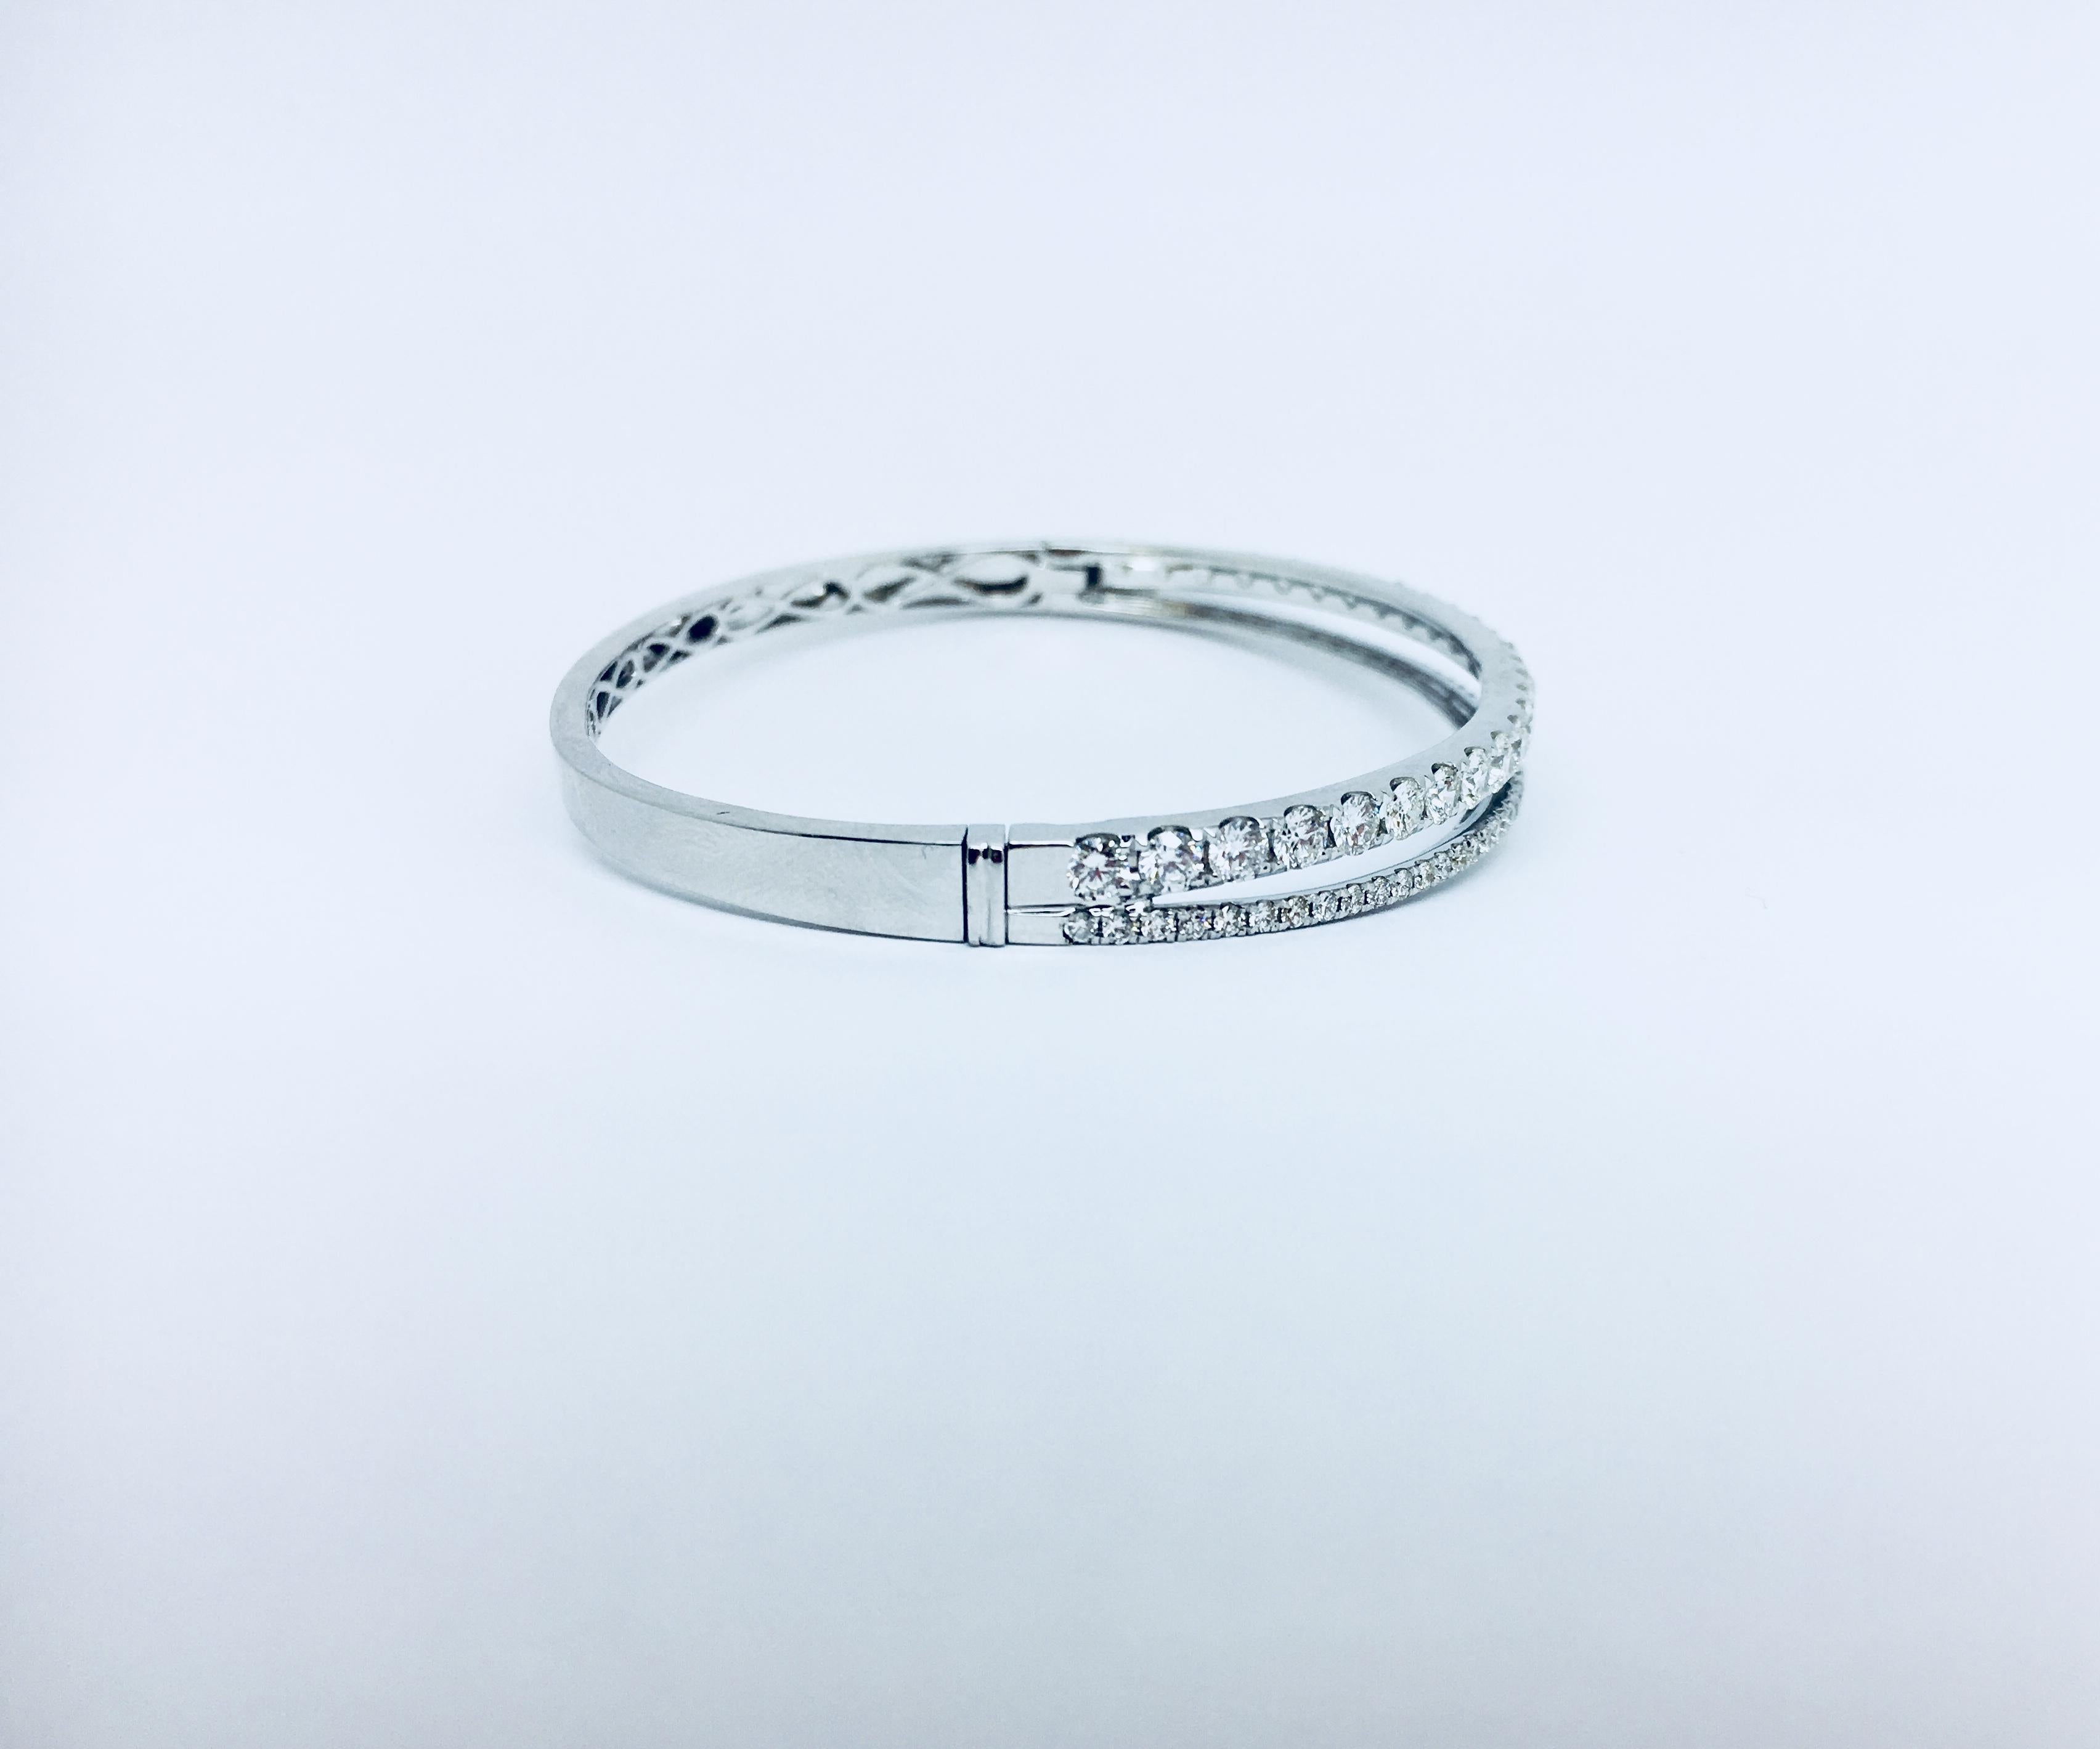 Diamond bangle double row of diamonds in 18kt white gold. This bracelet contains 78 round brilliant diamonds that total approximately 3.04 carats of diamonds. The bangle itself weighs 13.8 grams and would look great styled on it's own or paired with